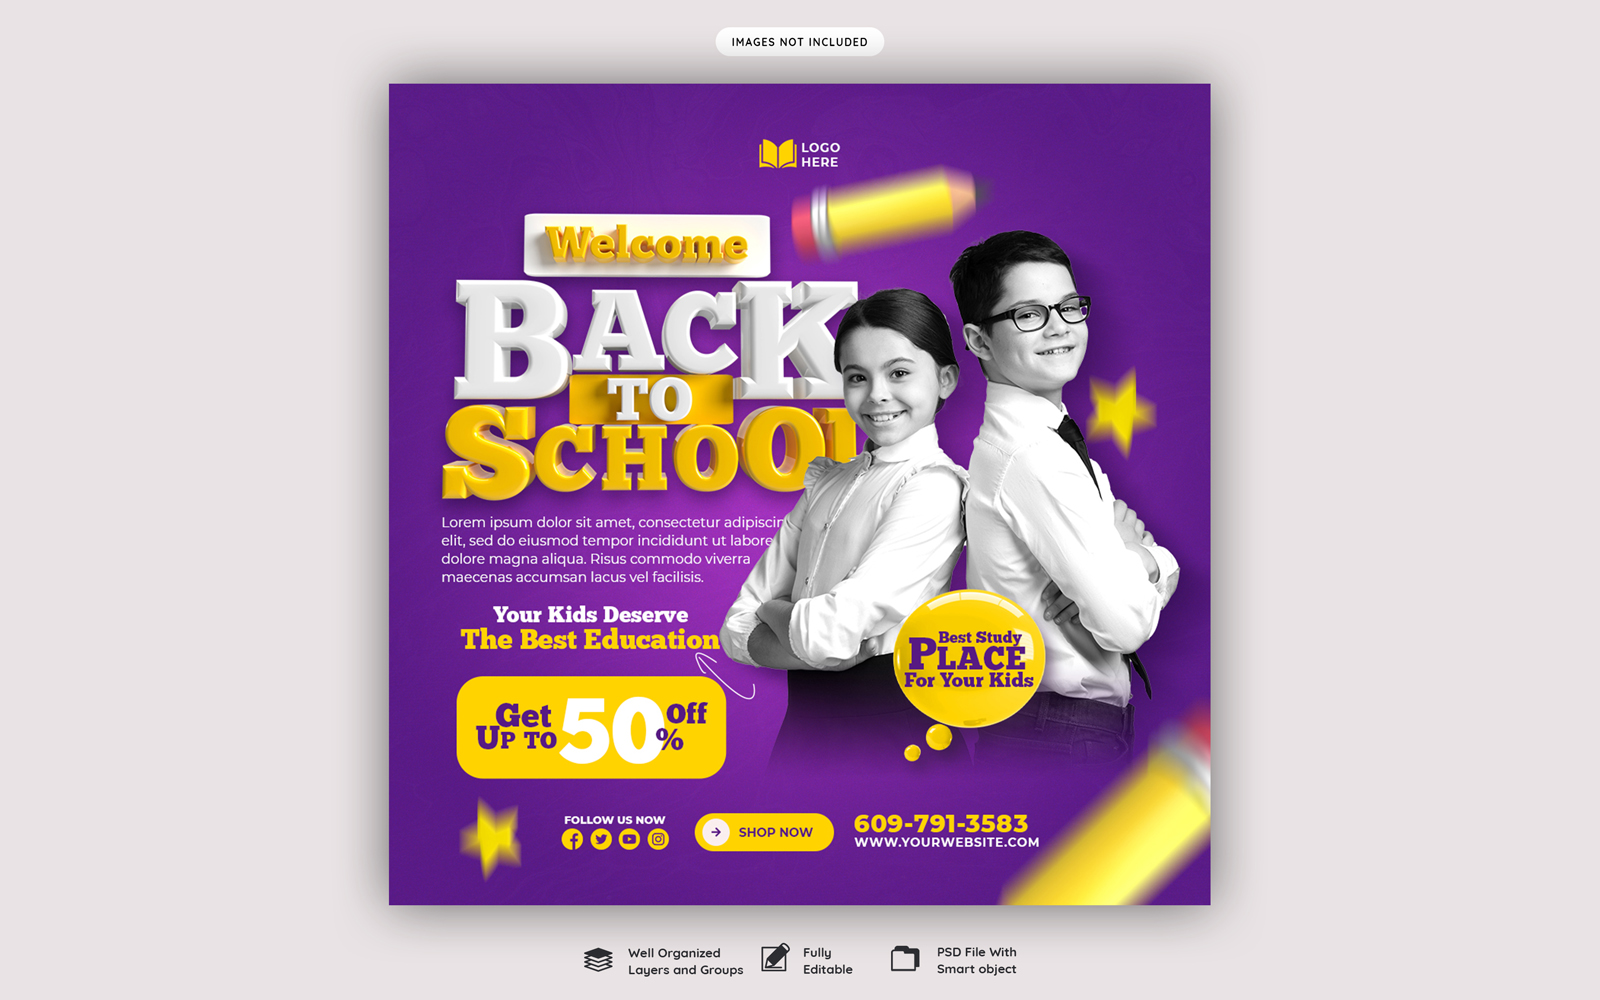 Welcome Back To School Social Media Post Template Design